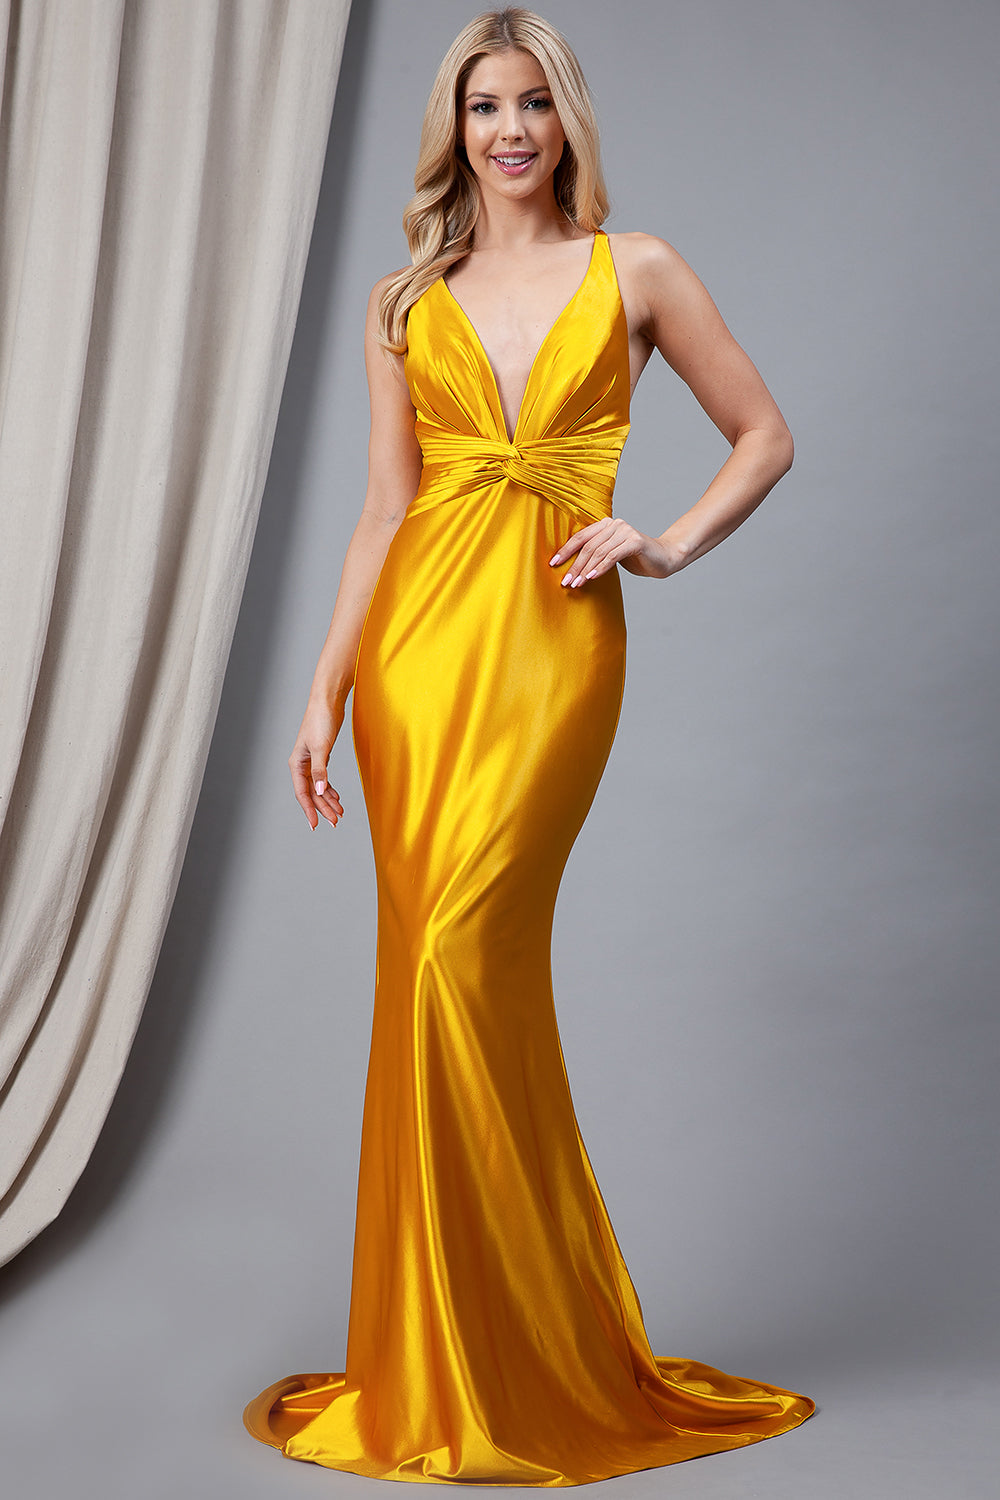 Ruched Stretch Jersey Evening Gown